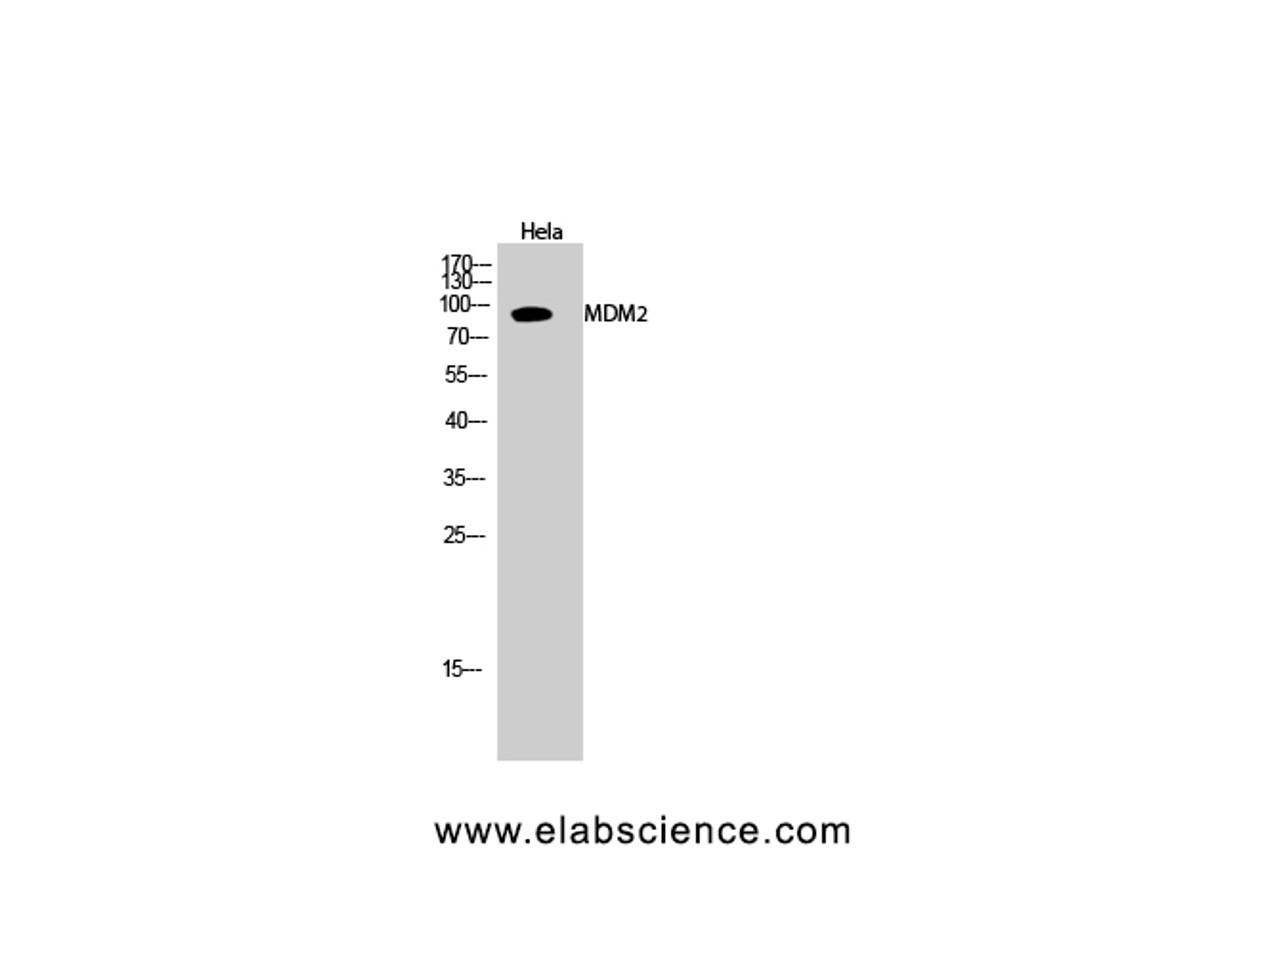 Western Blot analysis of Hela cells using MDM2 Polyclonal Antibody at dilution of 1:2000.